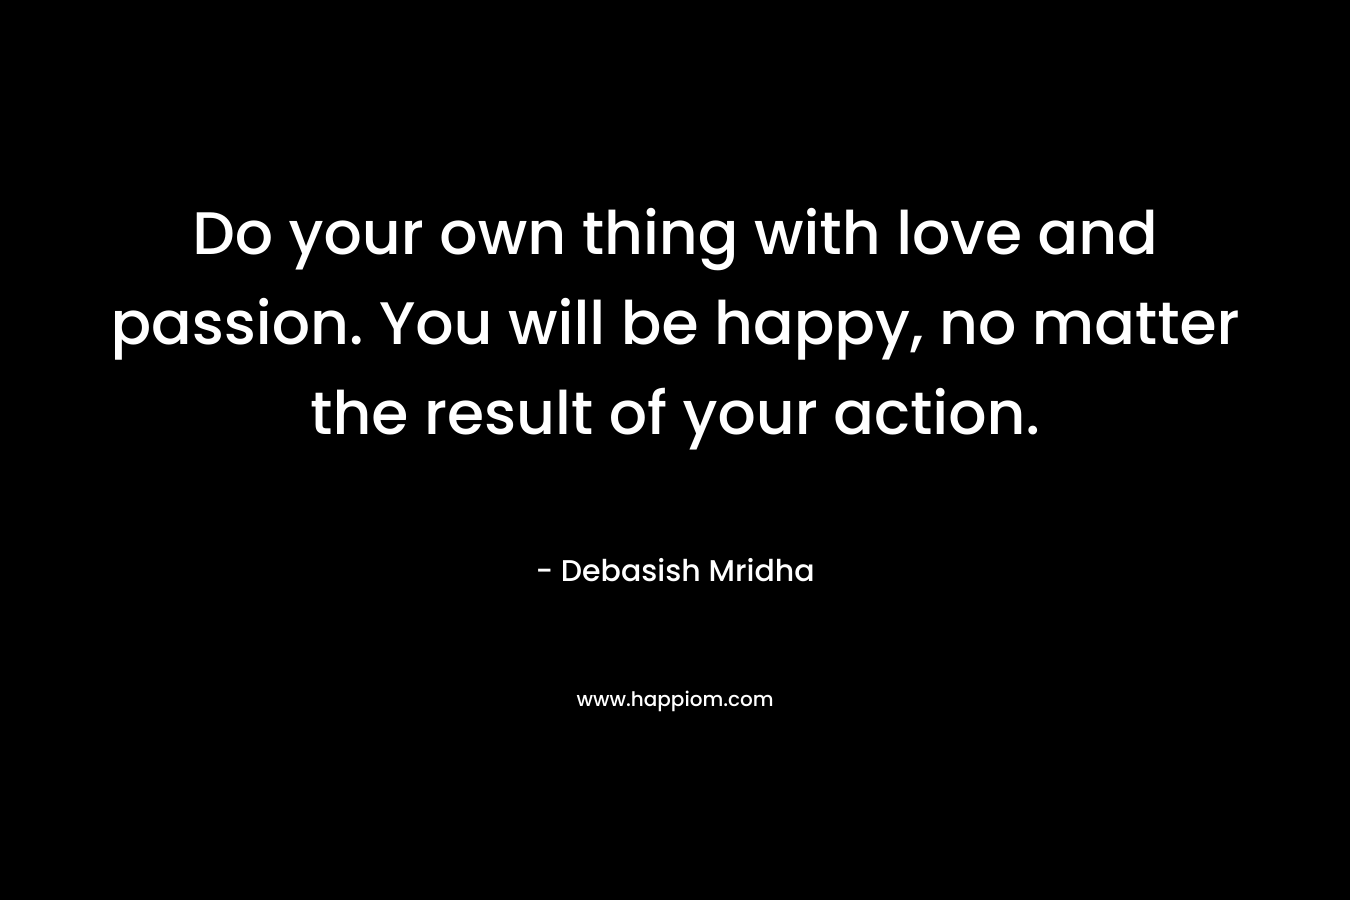 Do your own thing with love and passion. You will be happy, no matter the result of your action.